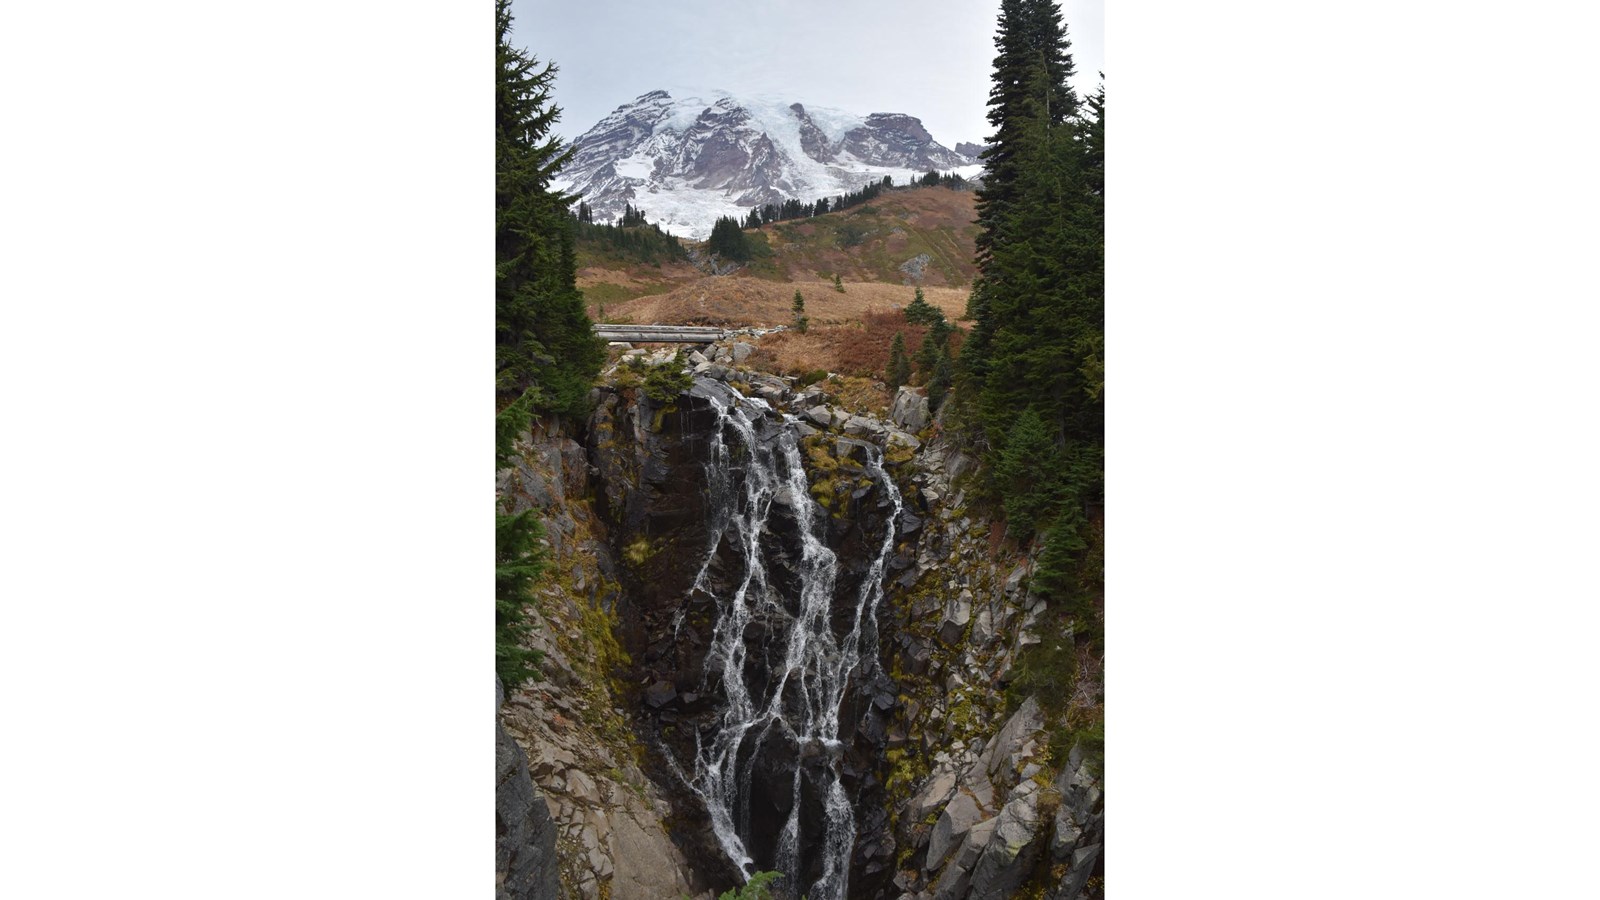 Braided cascade with glaciated mountain behind it